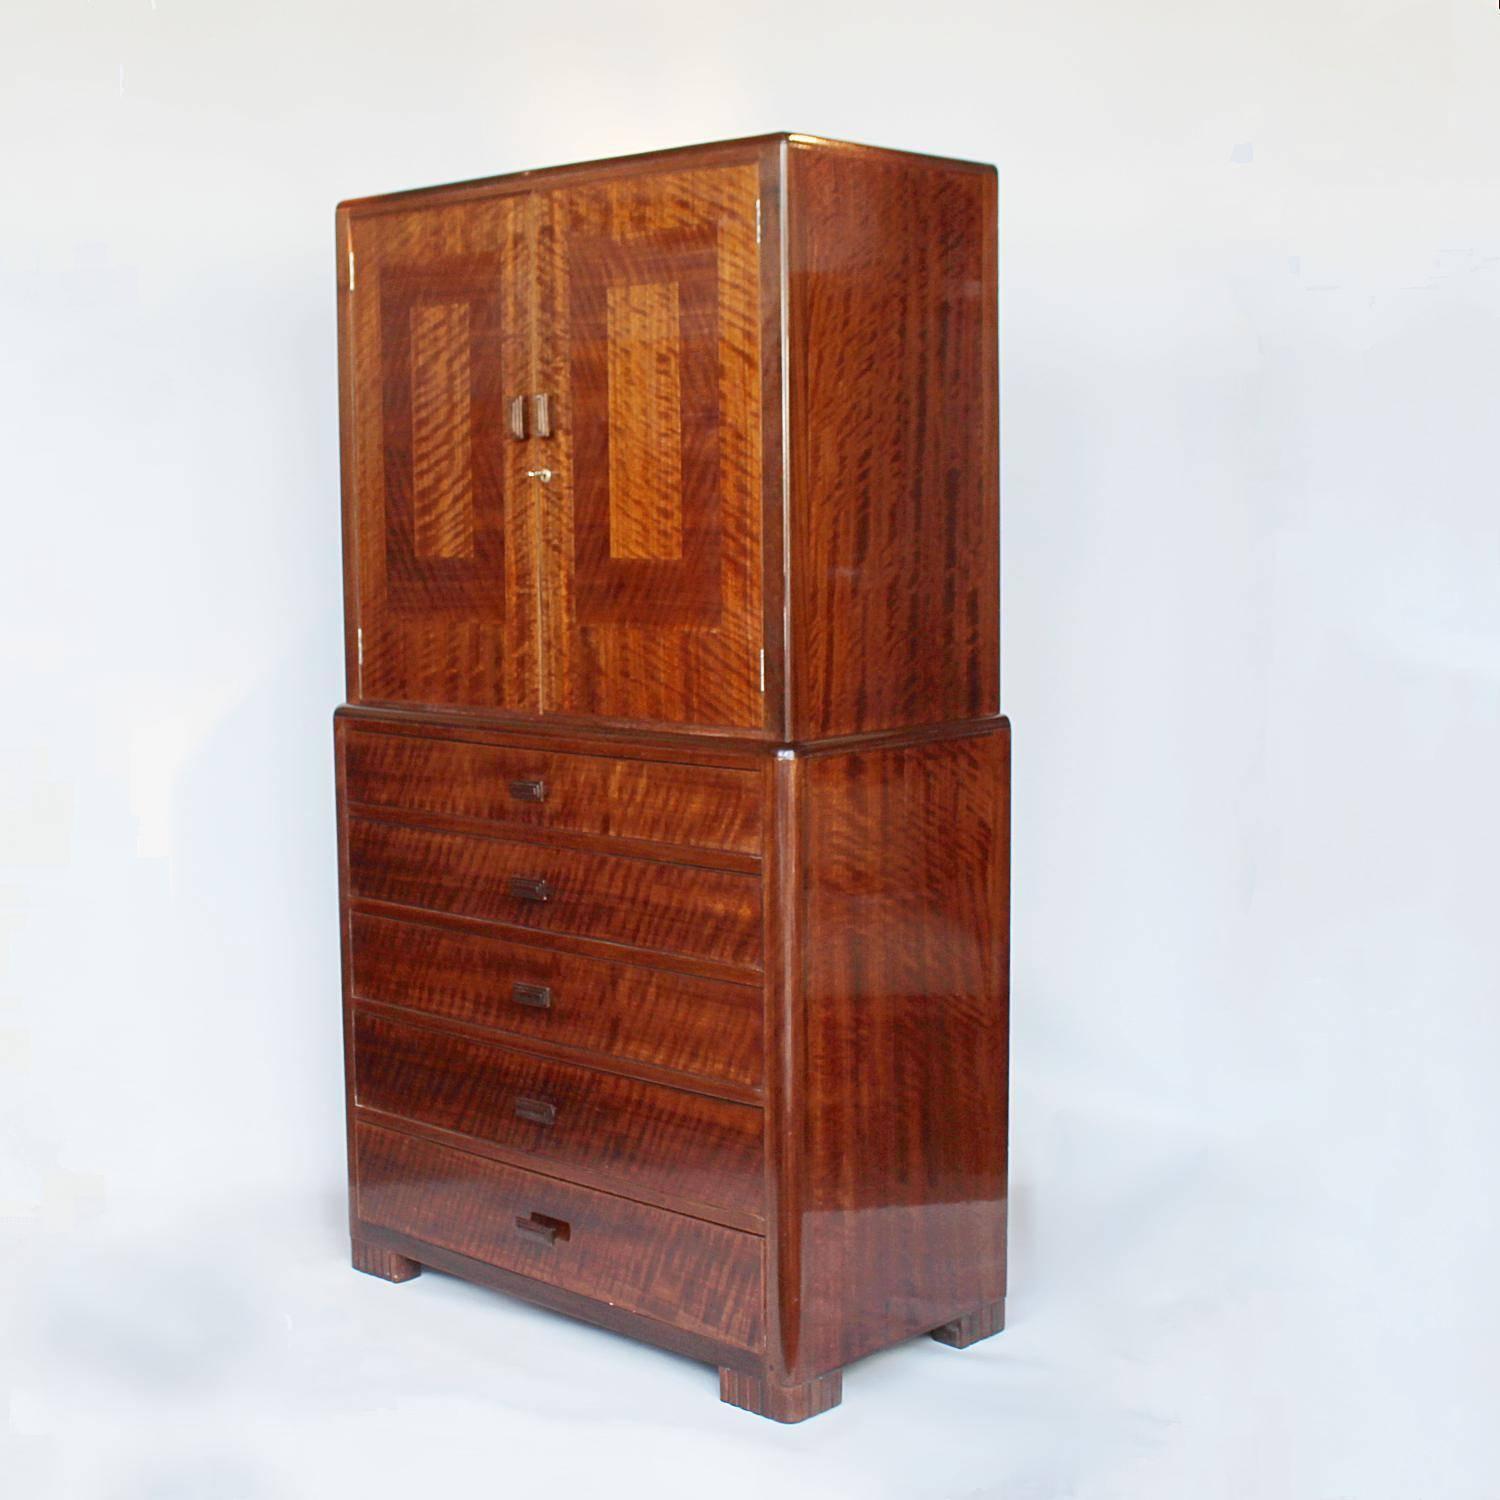 An Art Deco cabinet chest in Australian oak veneers with subtle design to top and original carved handles. Panel backed with original label.
Joel was a British furniture, textile and interior designer, active in England from circa 1921-1937. Her